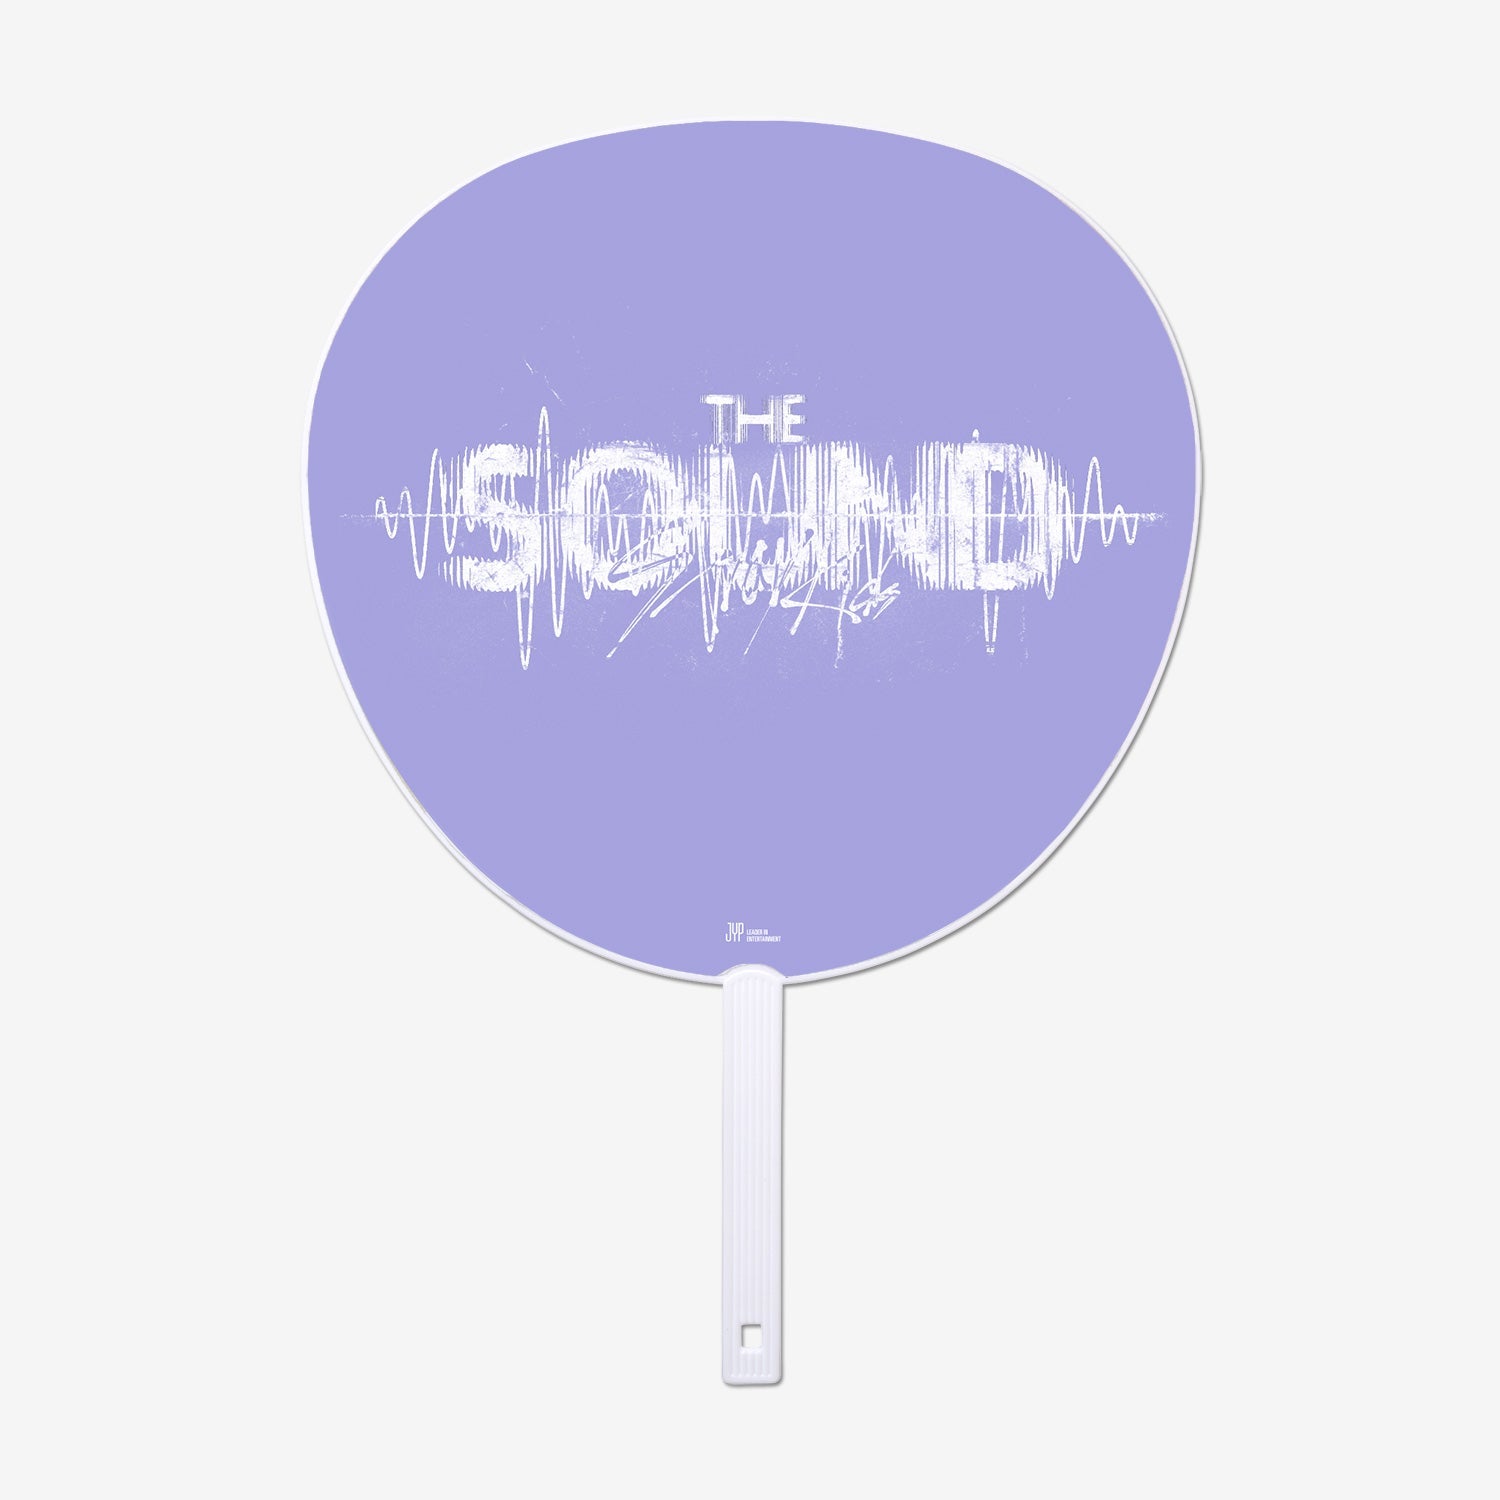 IMAGE PICKET - HAN / Stray Kids『THE SOUND』